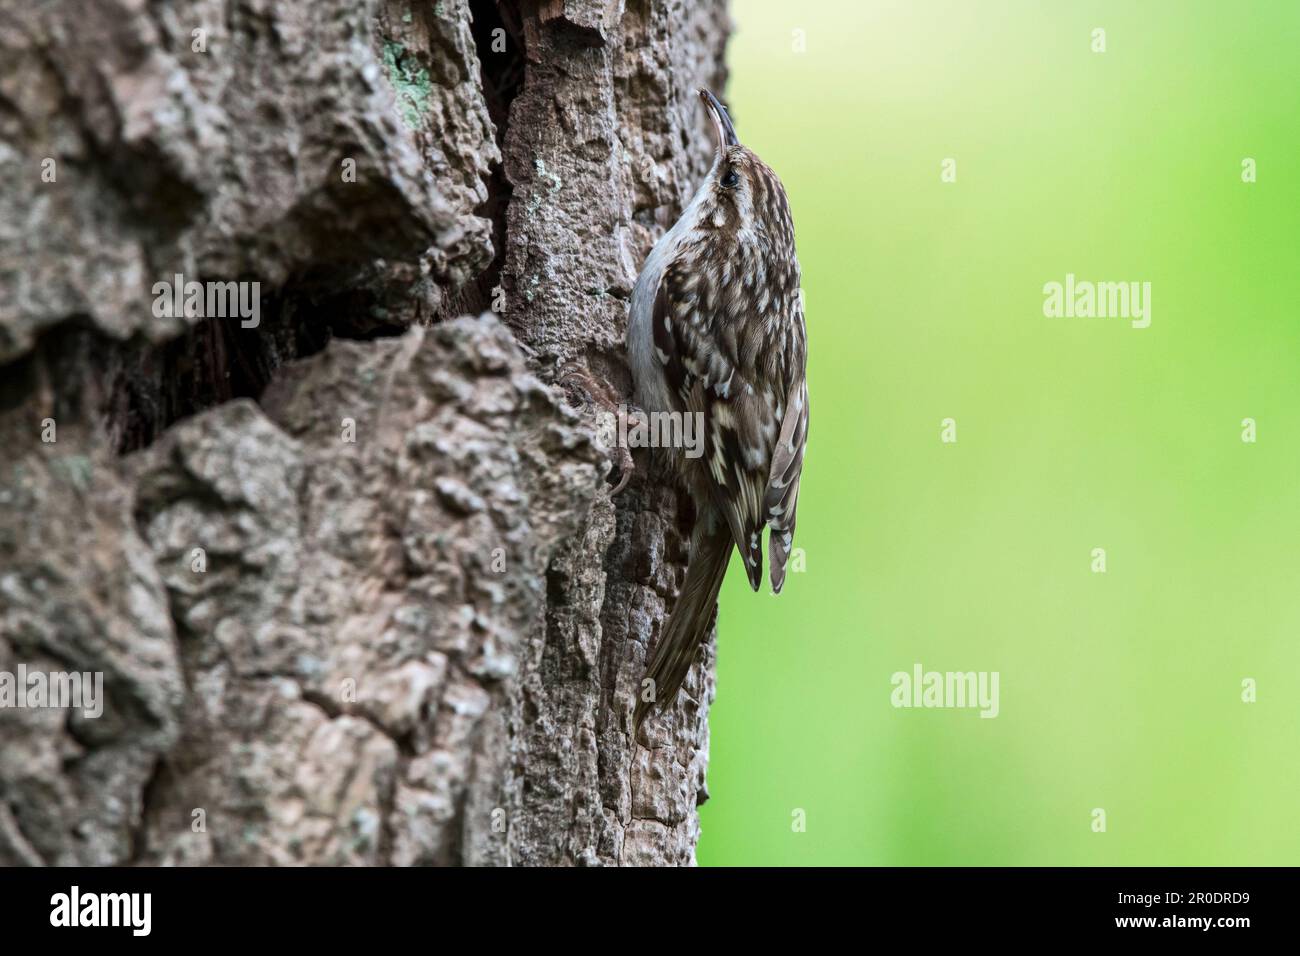 Short-toed treecreeper (Certhia brachydactyla) showing camouflage colours while foraging for invertebrates on bark of tree trunk in forest Stock Photo